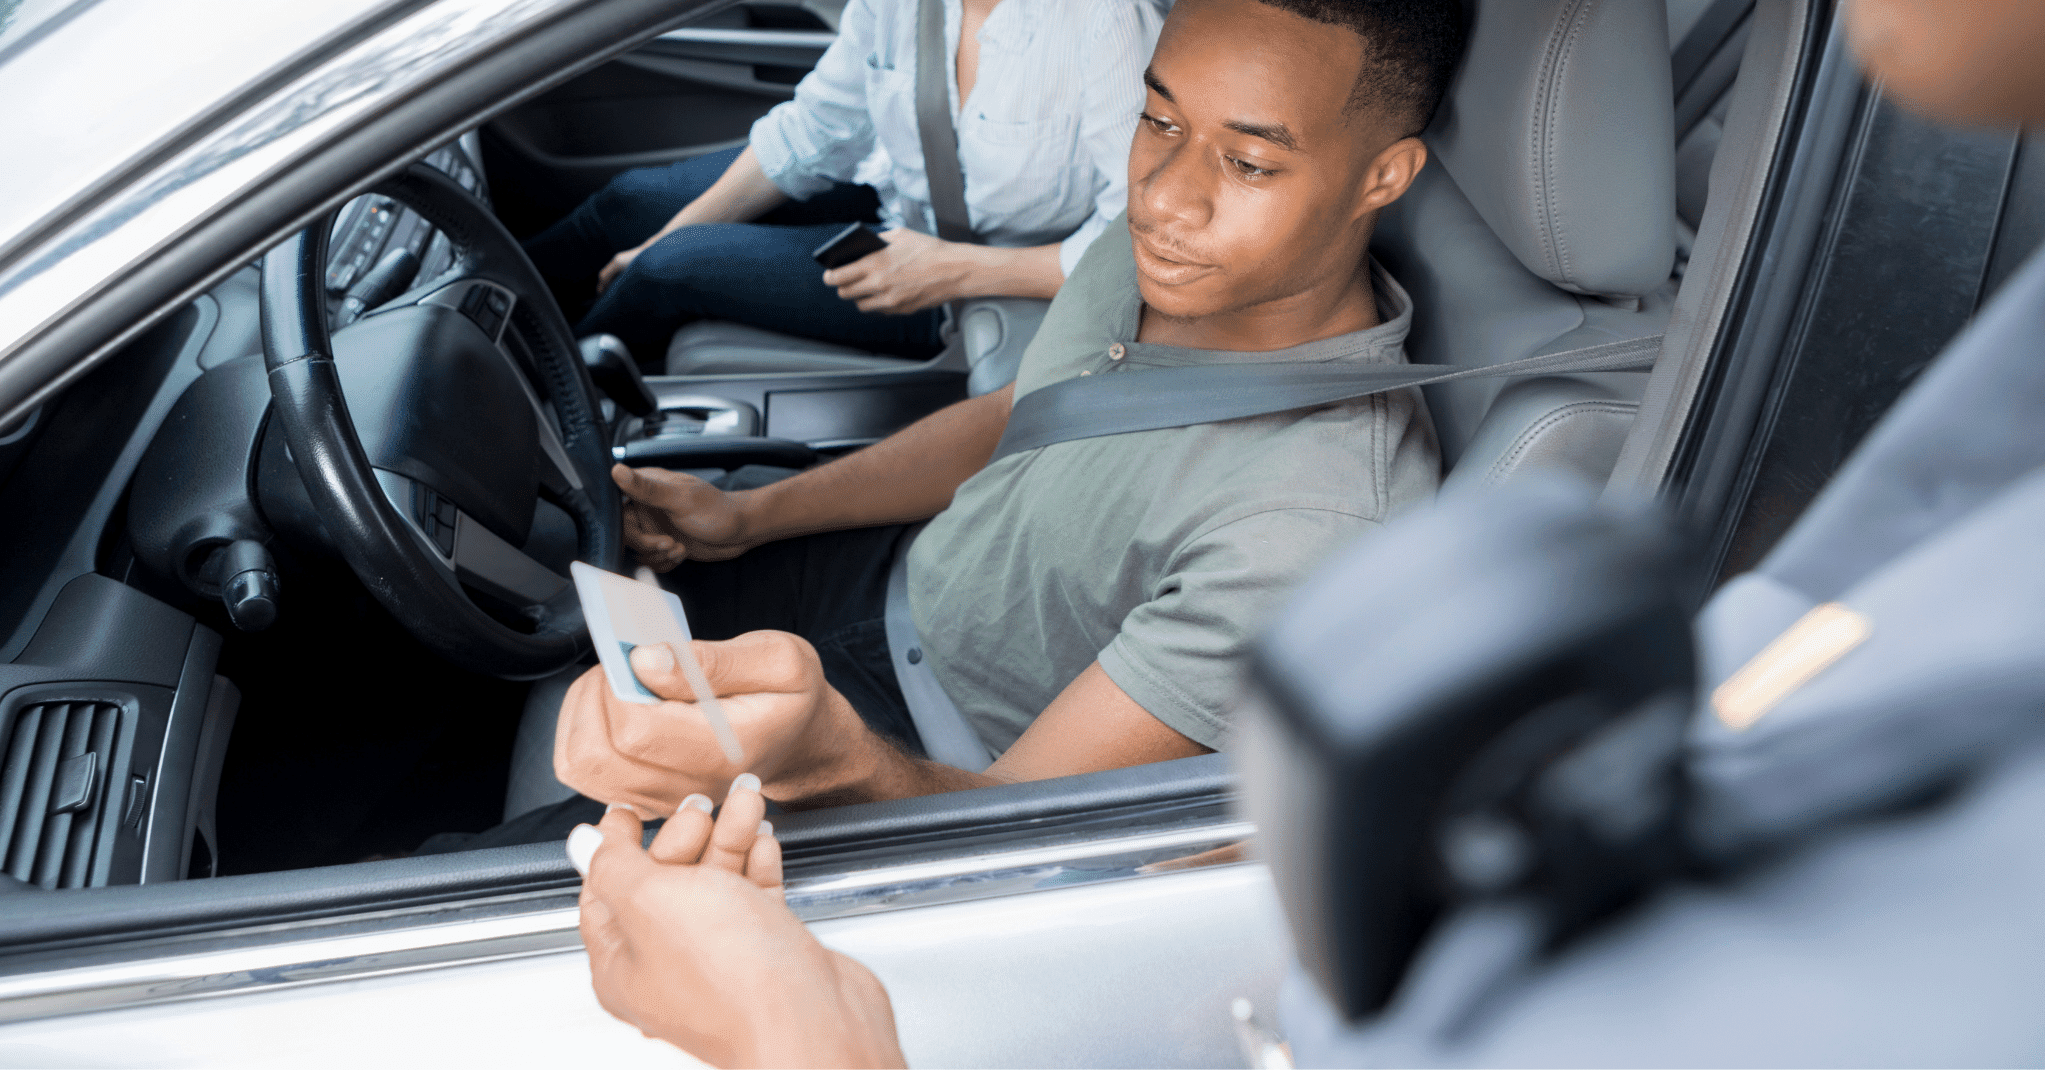 8 Steps To Take After Getting Pulled Over For Speeding